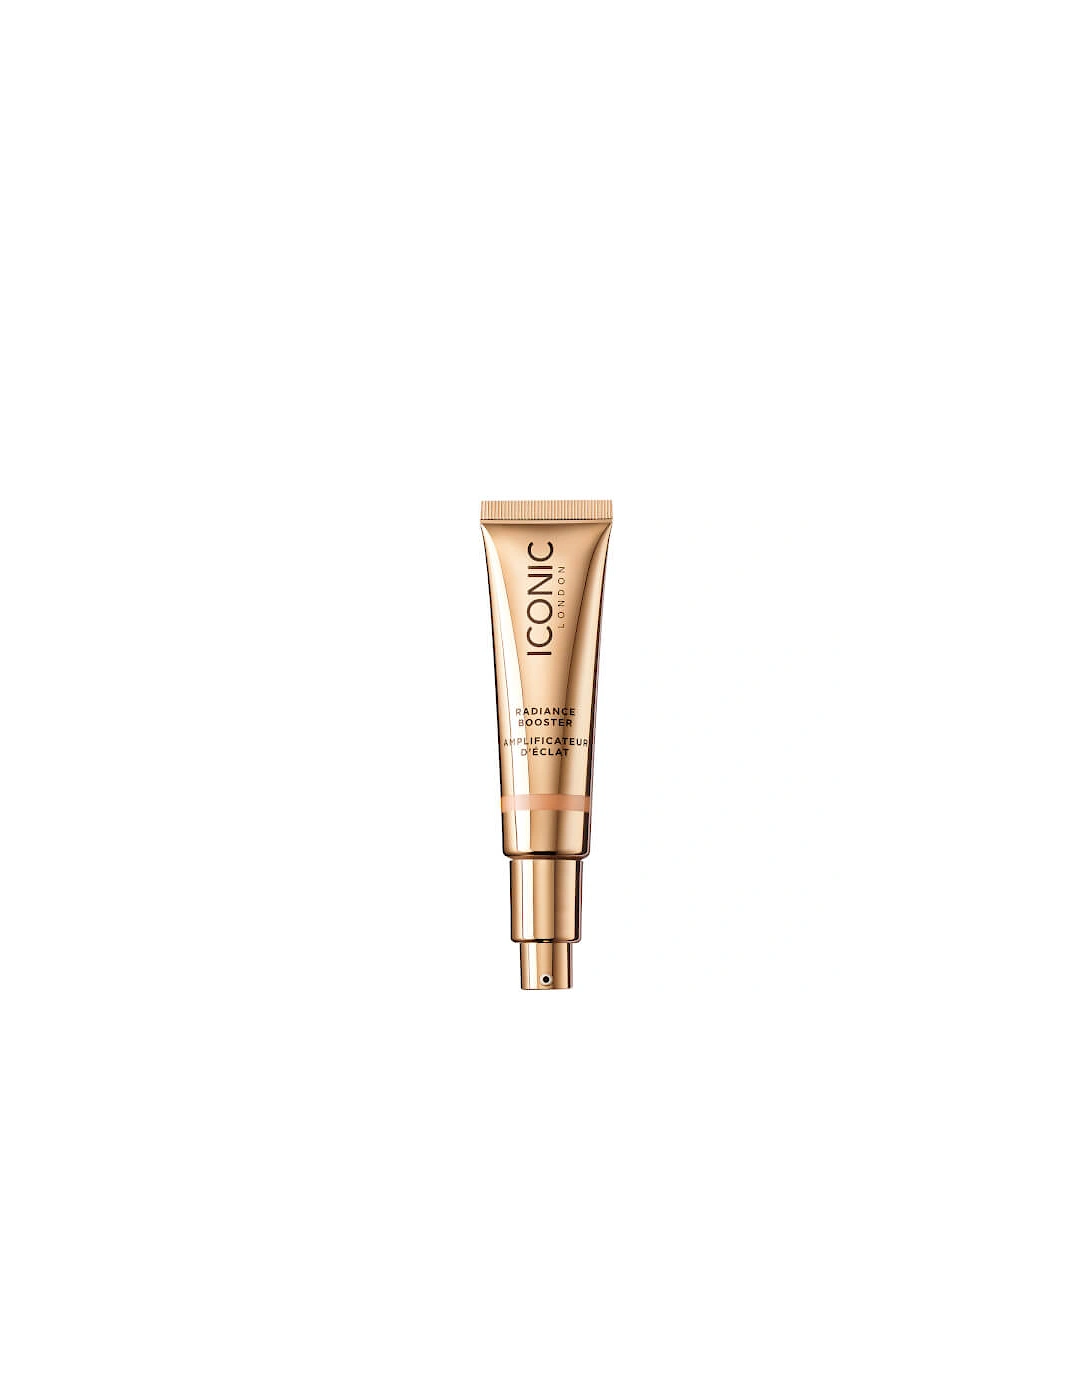 Radiance Booster - Champagne Glow 30ml, 2 of 1